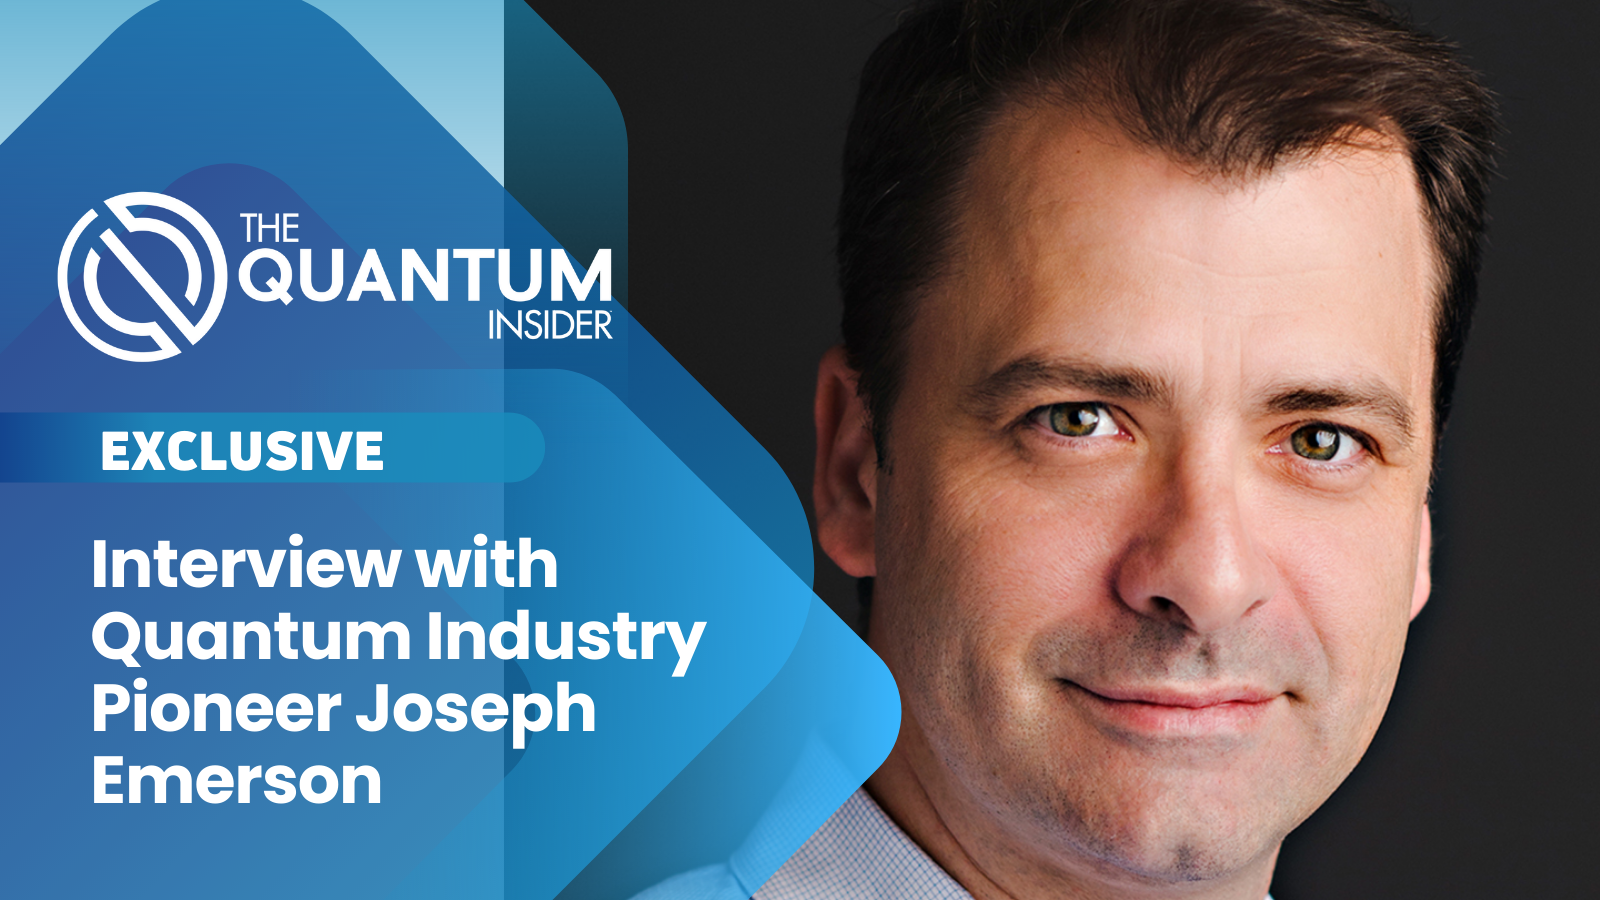 TQI Exclusive: Interview with Quantum Industry Pioneer Joseph Emerson on What it Takes to Achieve Quantum Advantage